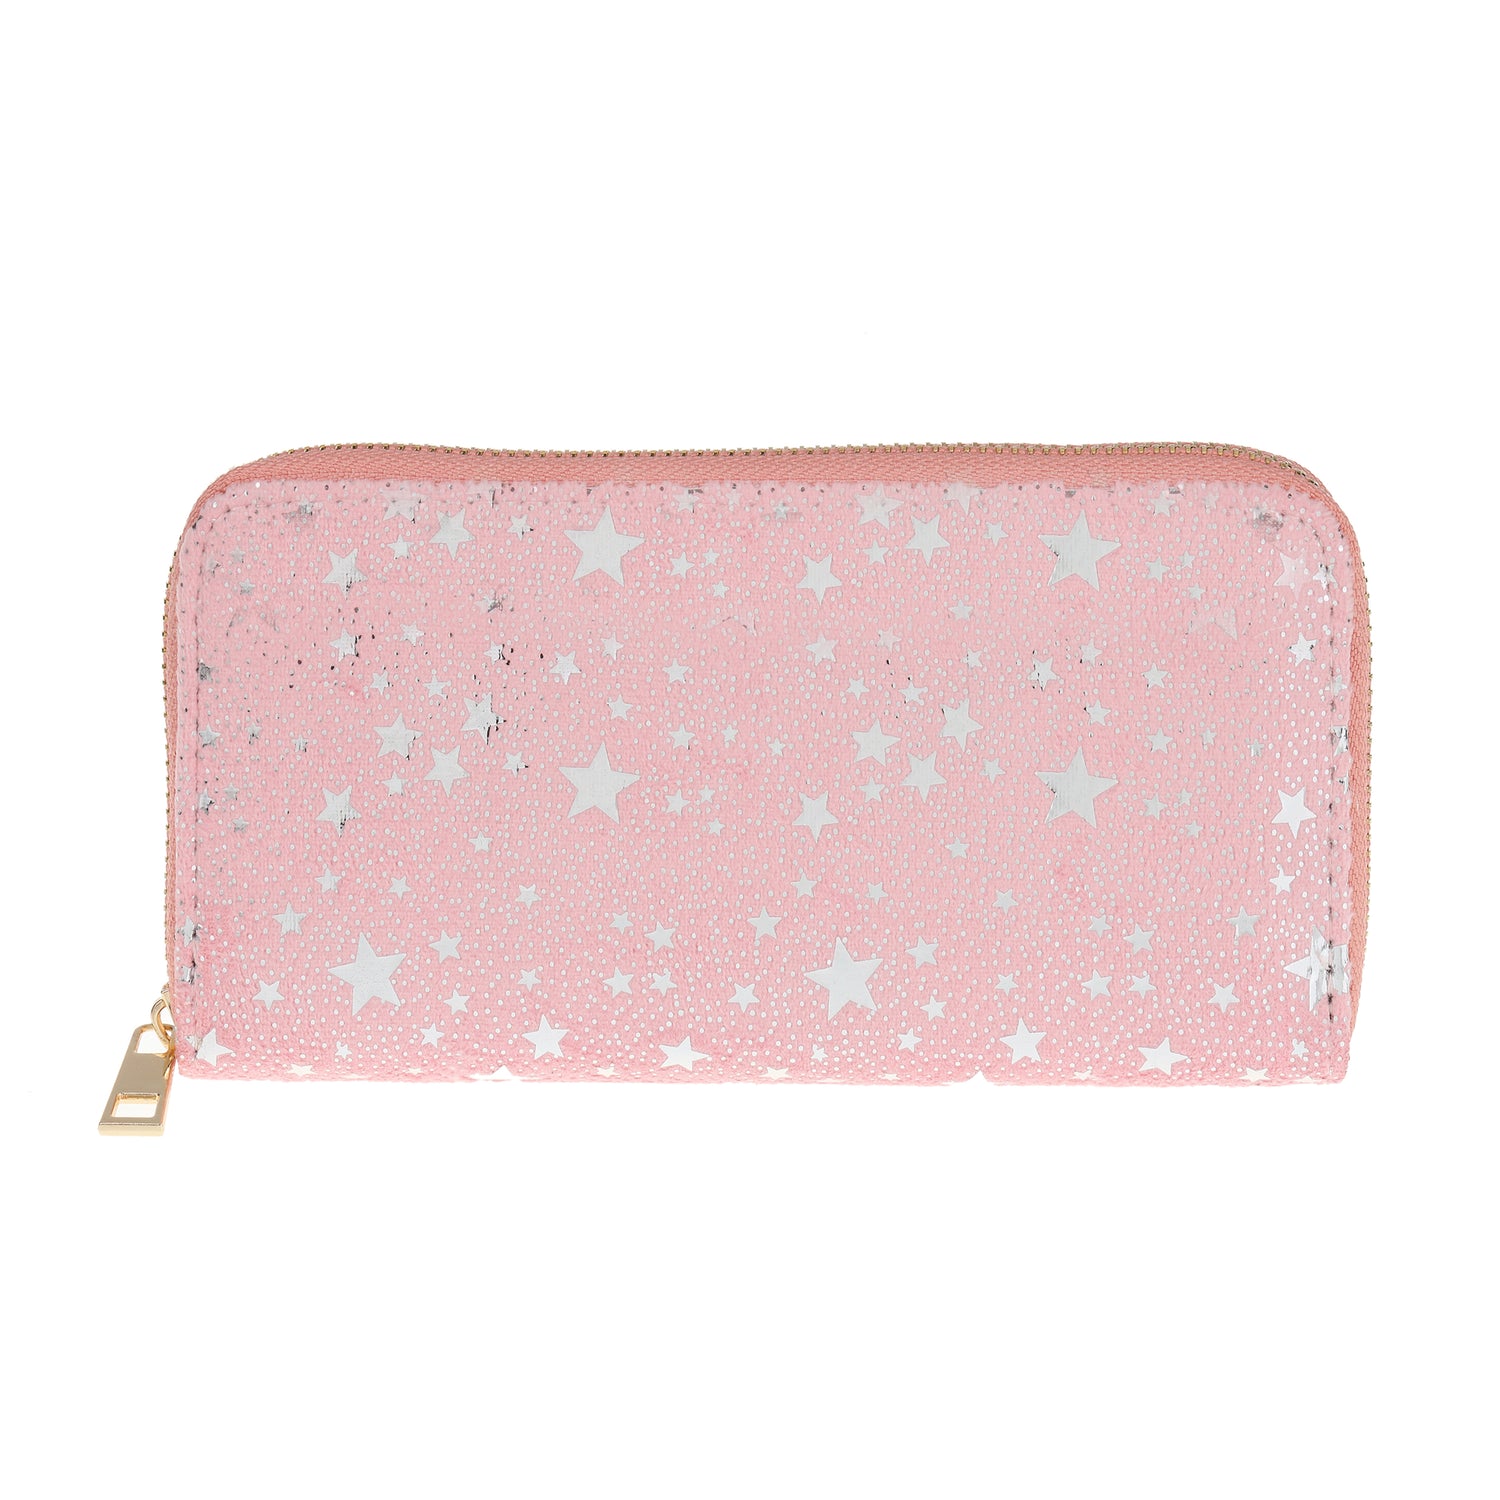 Sparkle Star Gift Box Wallet - Pink